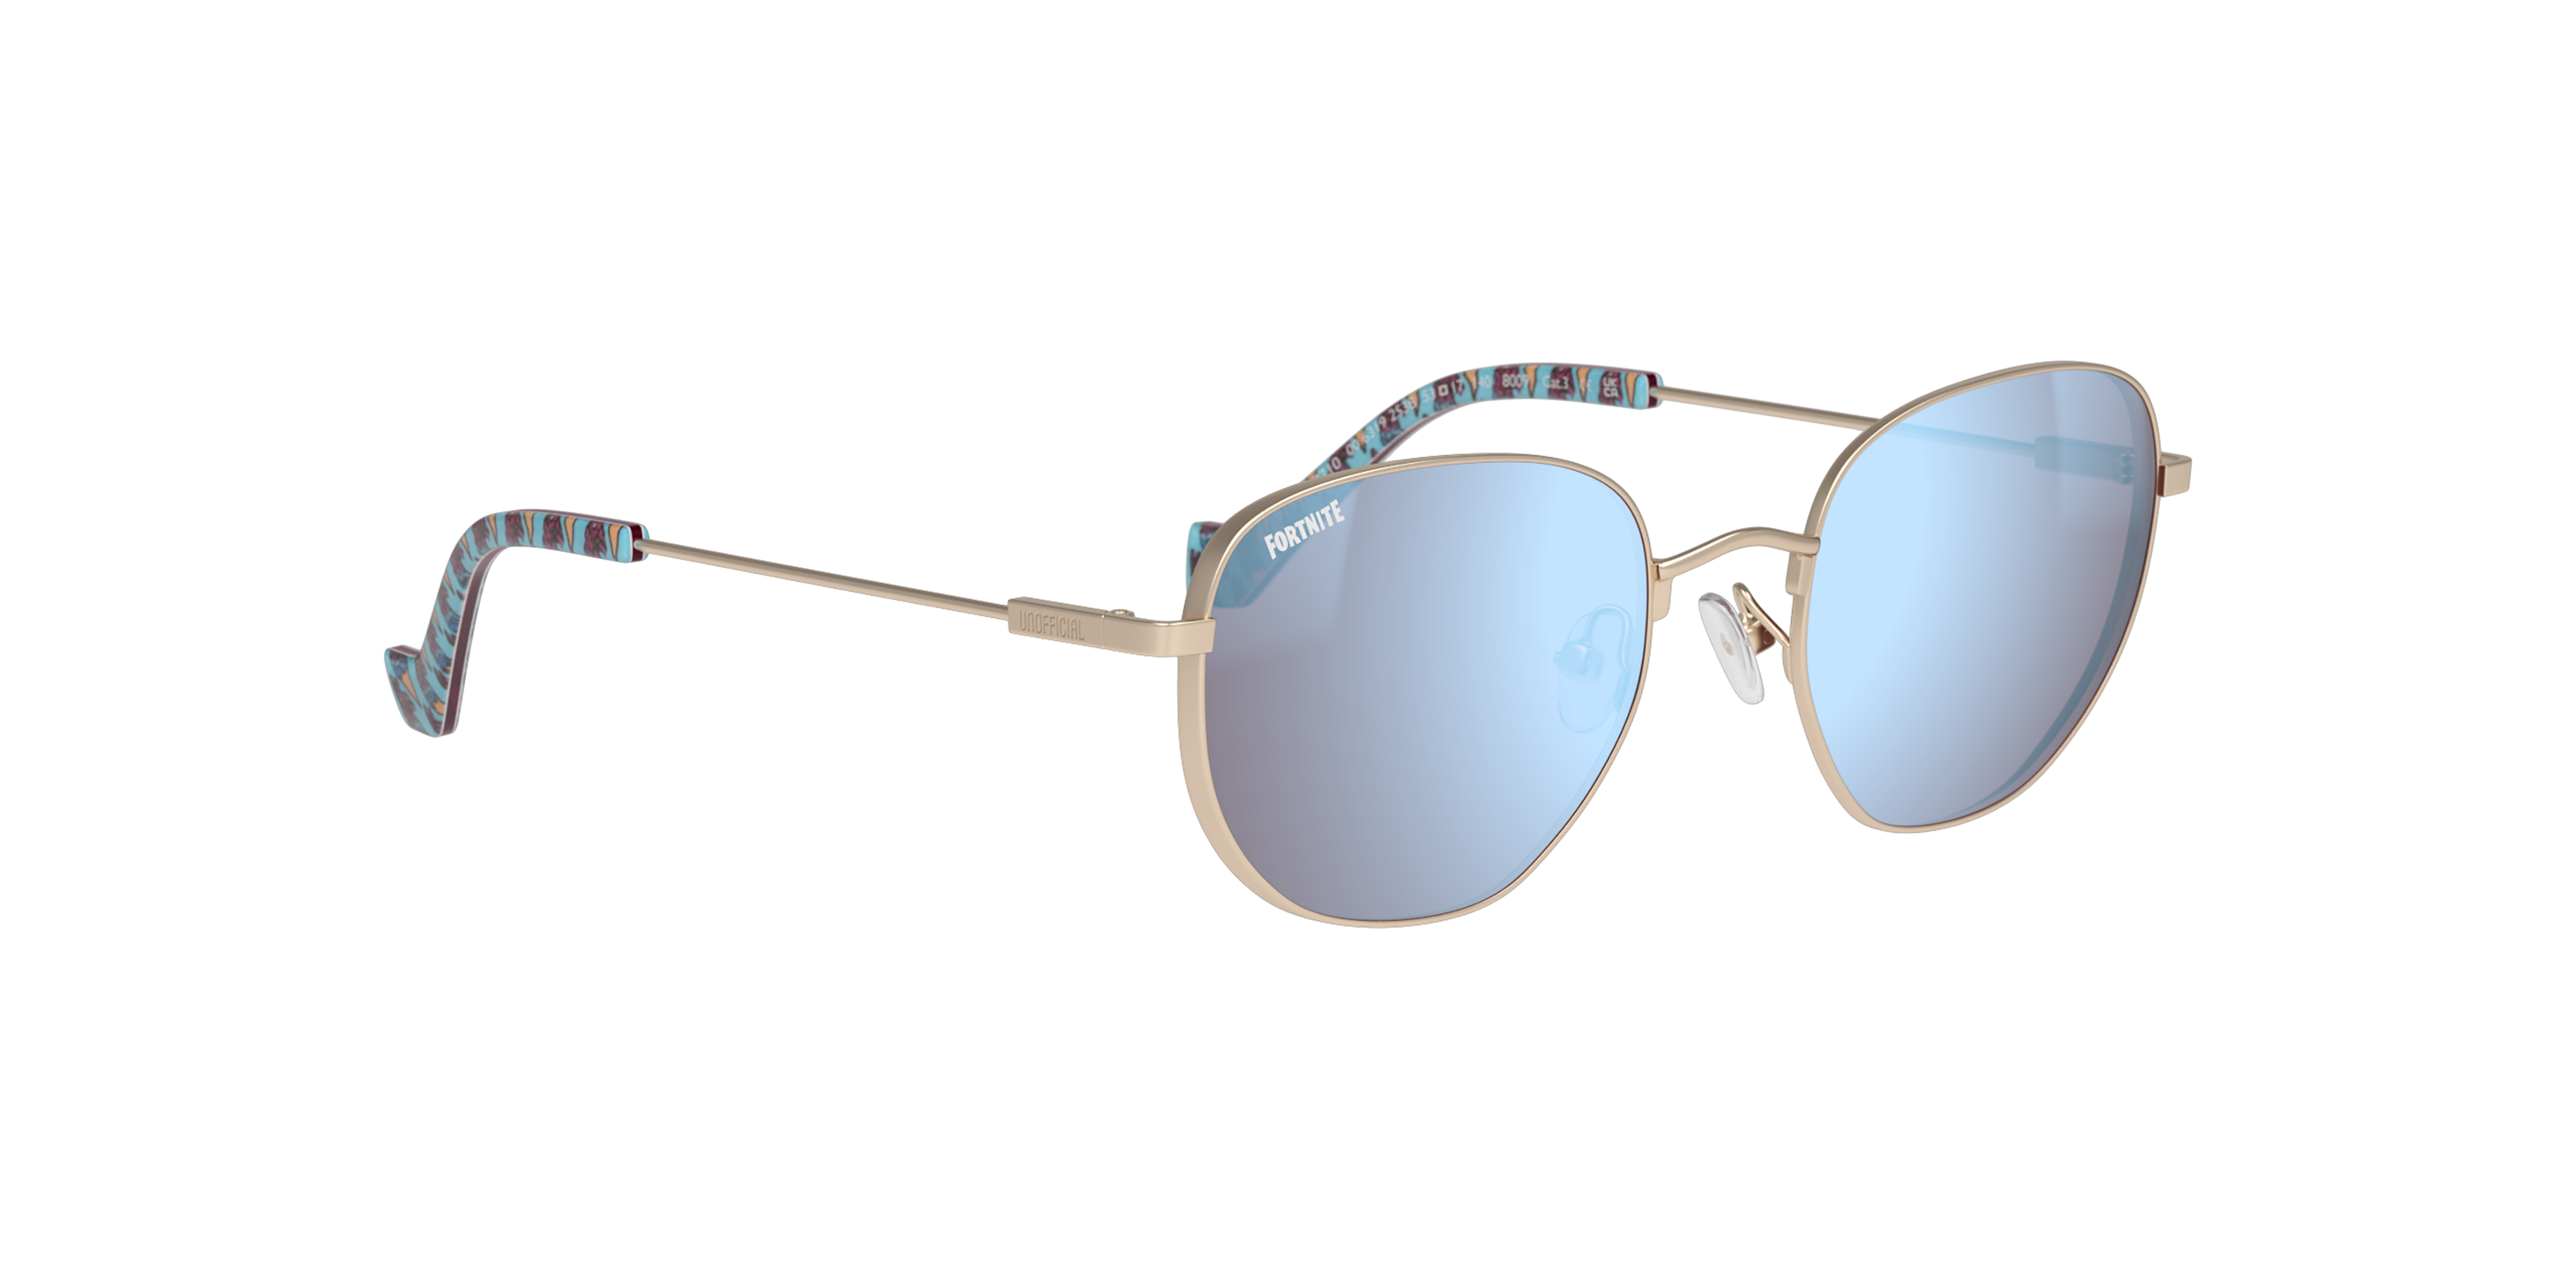 Angle_Right01 Fortnite with Unofficial UNSU0155 Sunglasses Grey / Gold